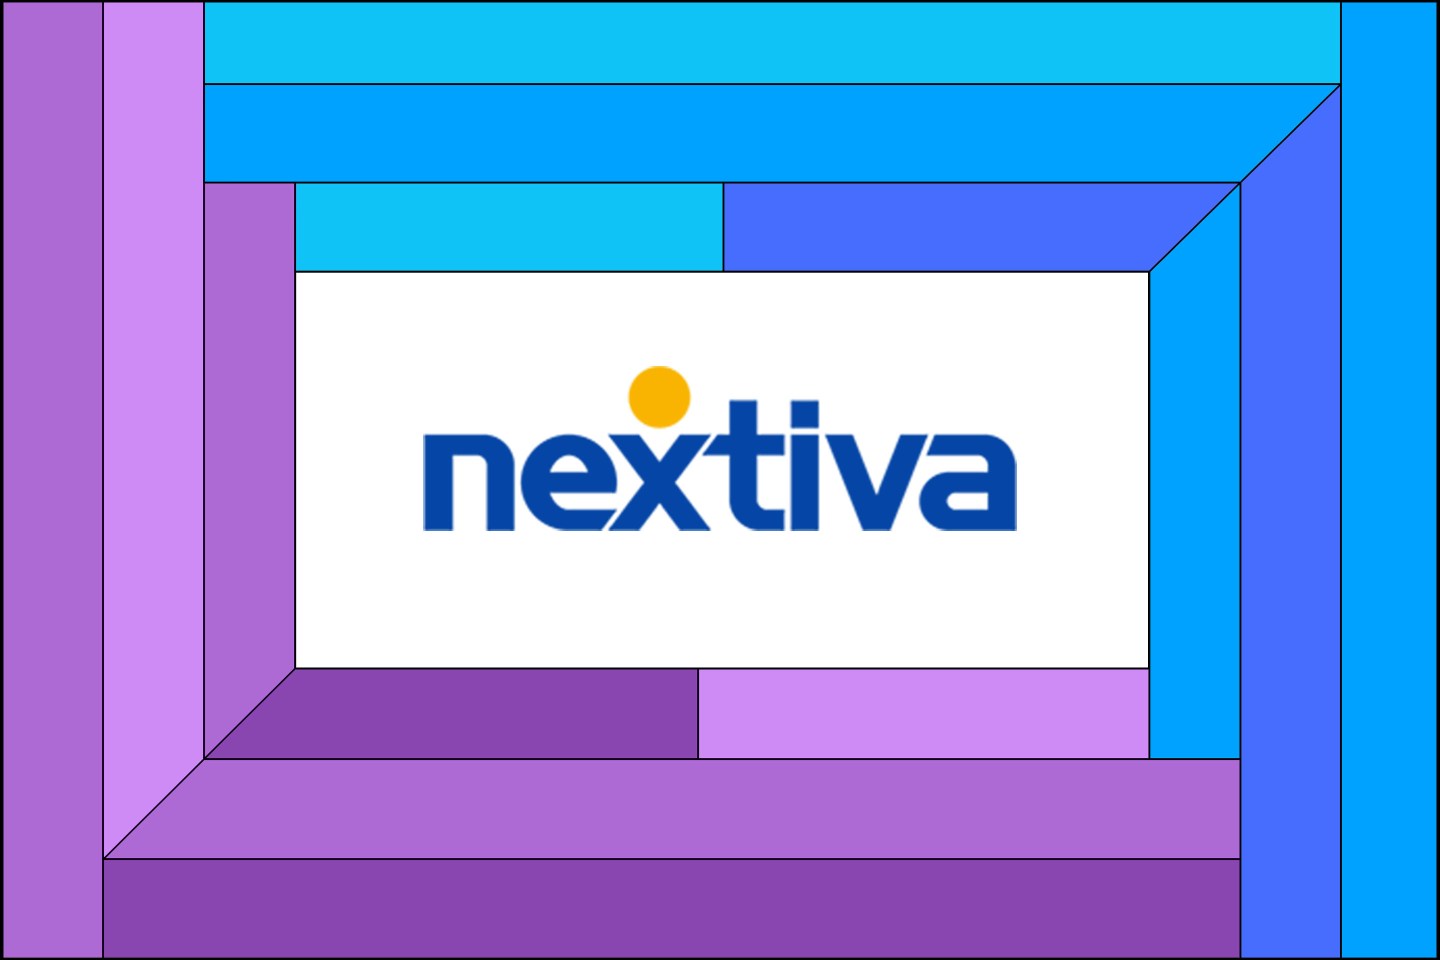 The Nextiva logo on a purple and blue graphic frame.